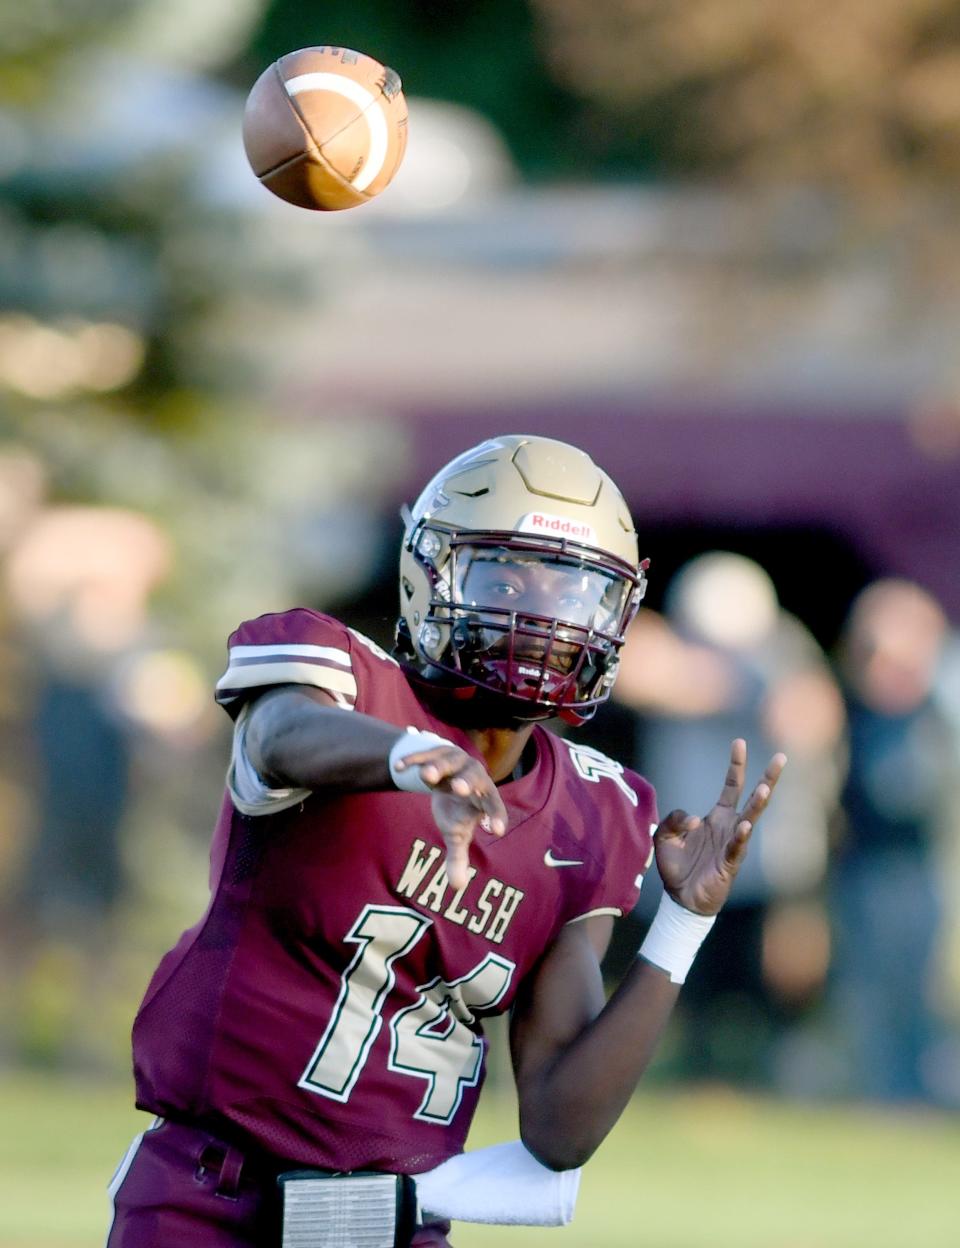 Walsh quarterback Amare Jenkins throws a pass during the first quarter of Thursday's season opener against West Liberty.